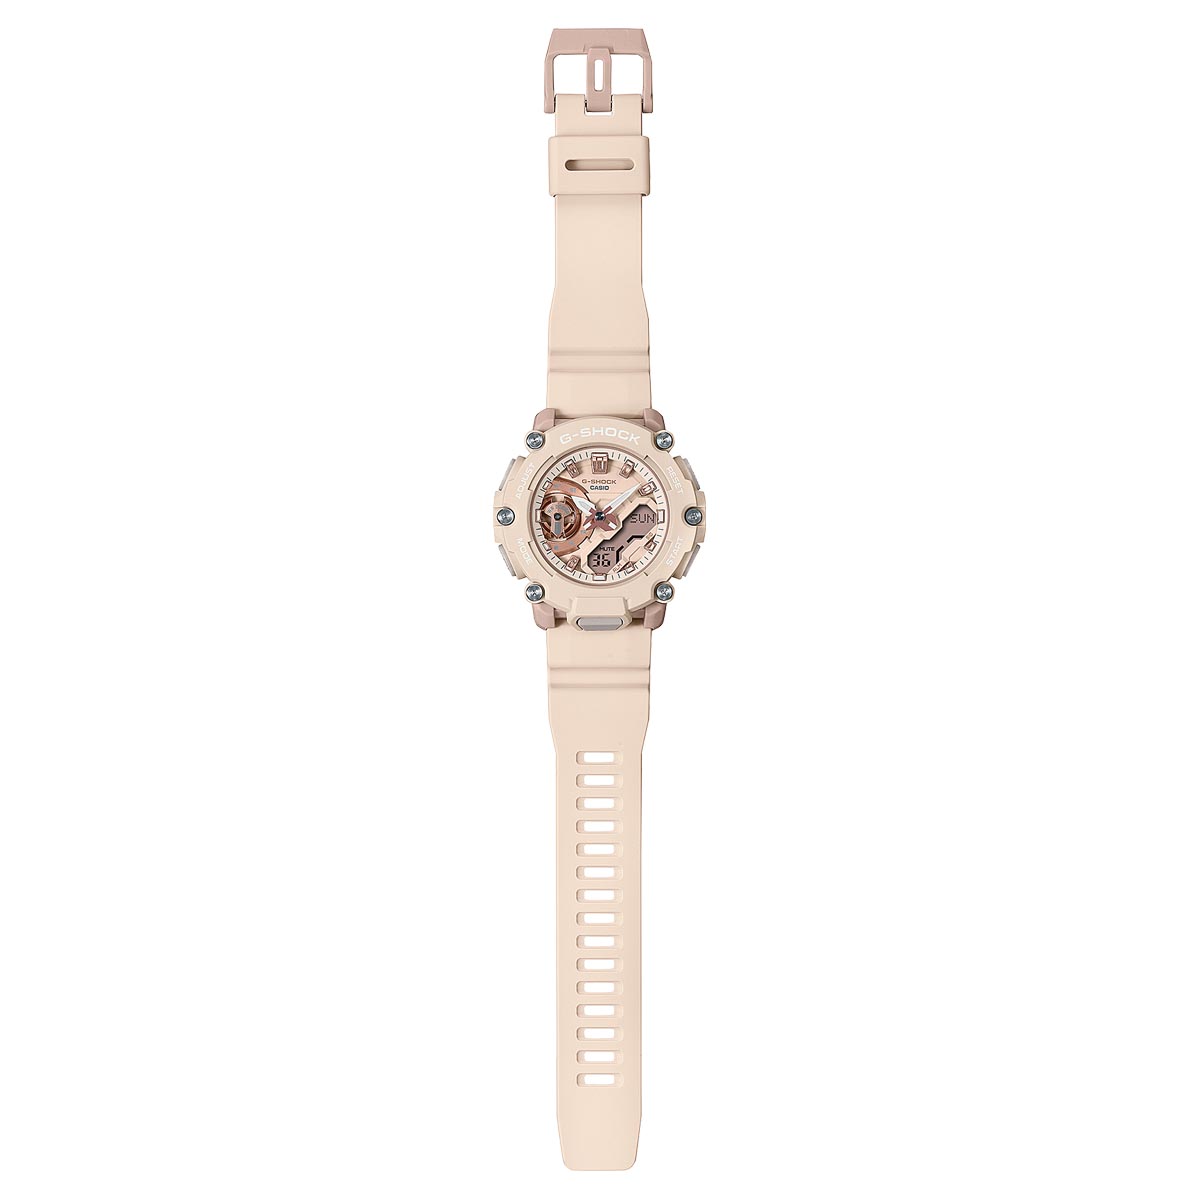 G Shock Womens Watch with Pink Dial and Pink Resin Strap (quartz movement)